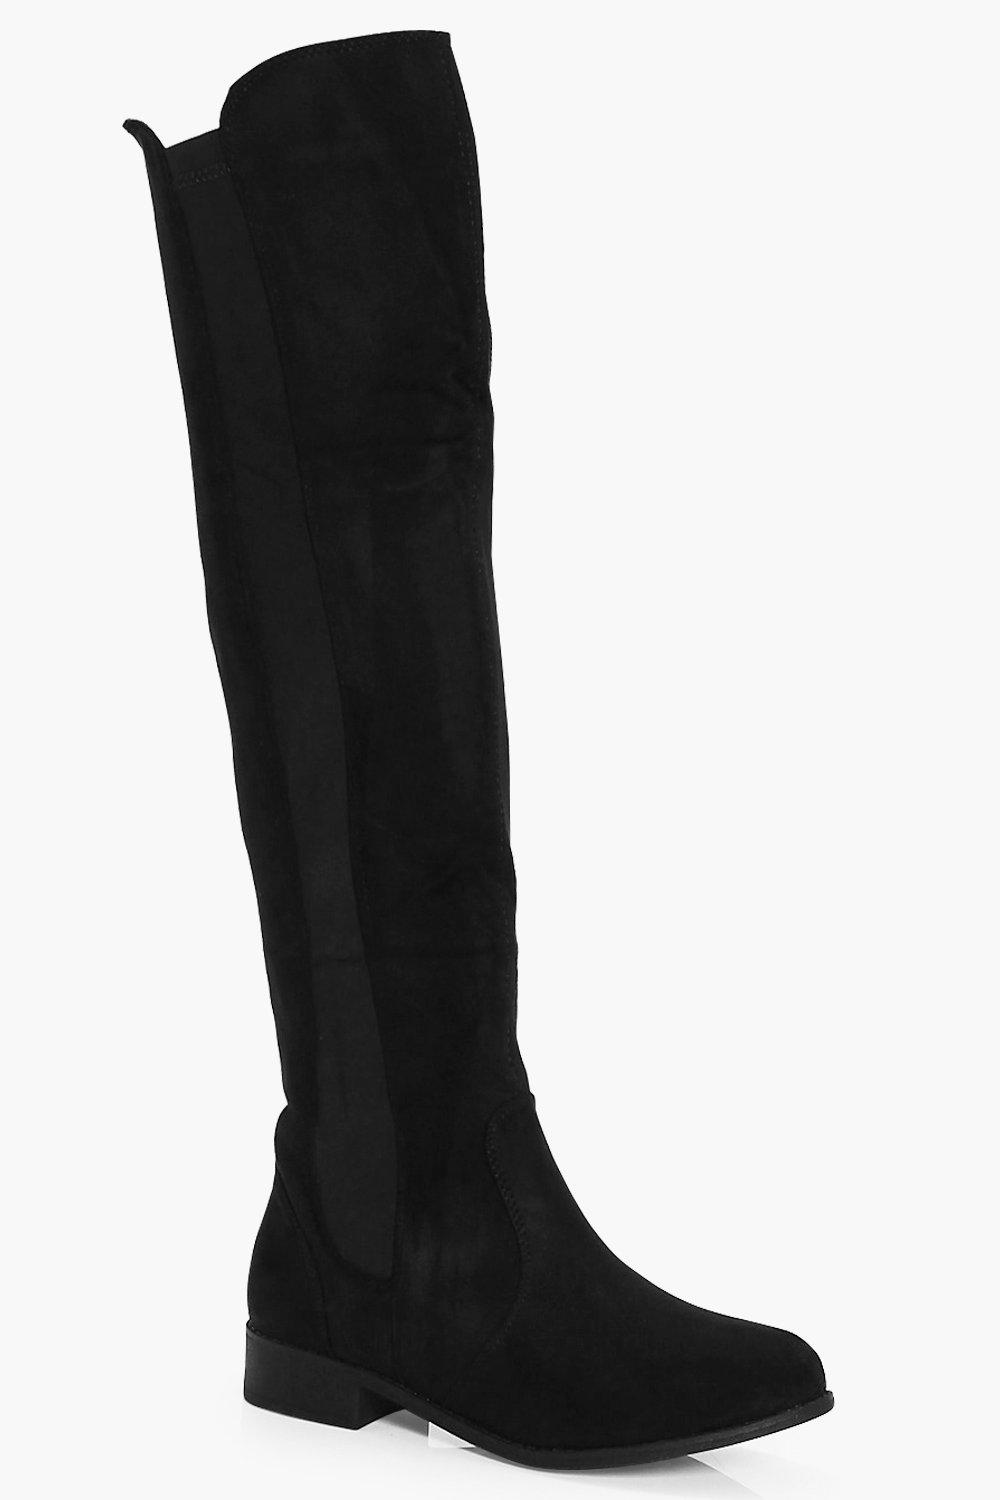 Jessica Flat Over The Knee Boot at boohoo.com